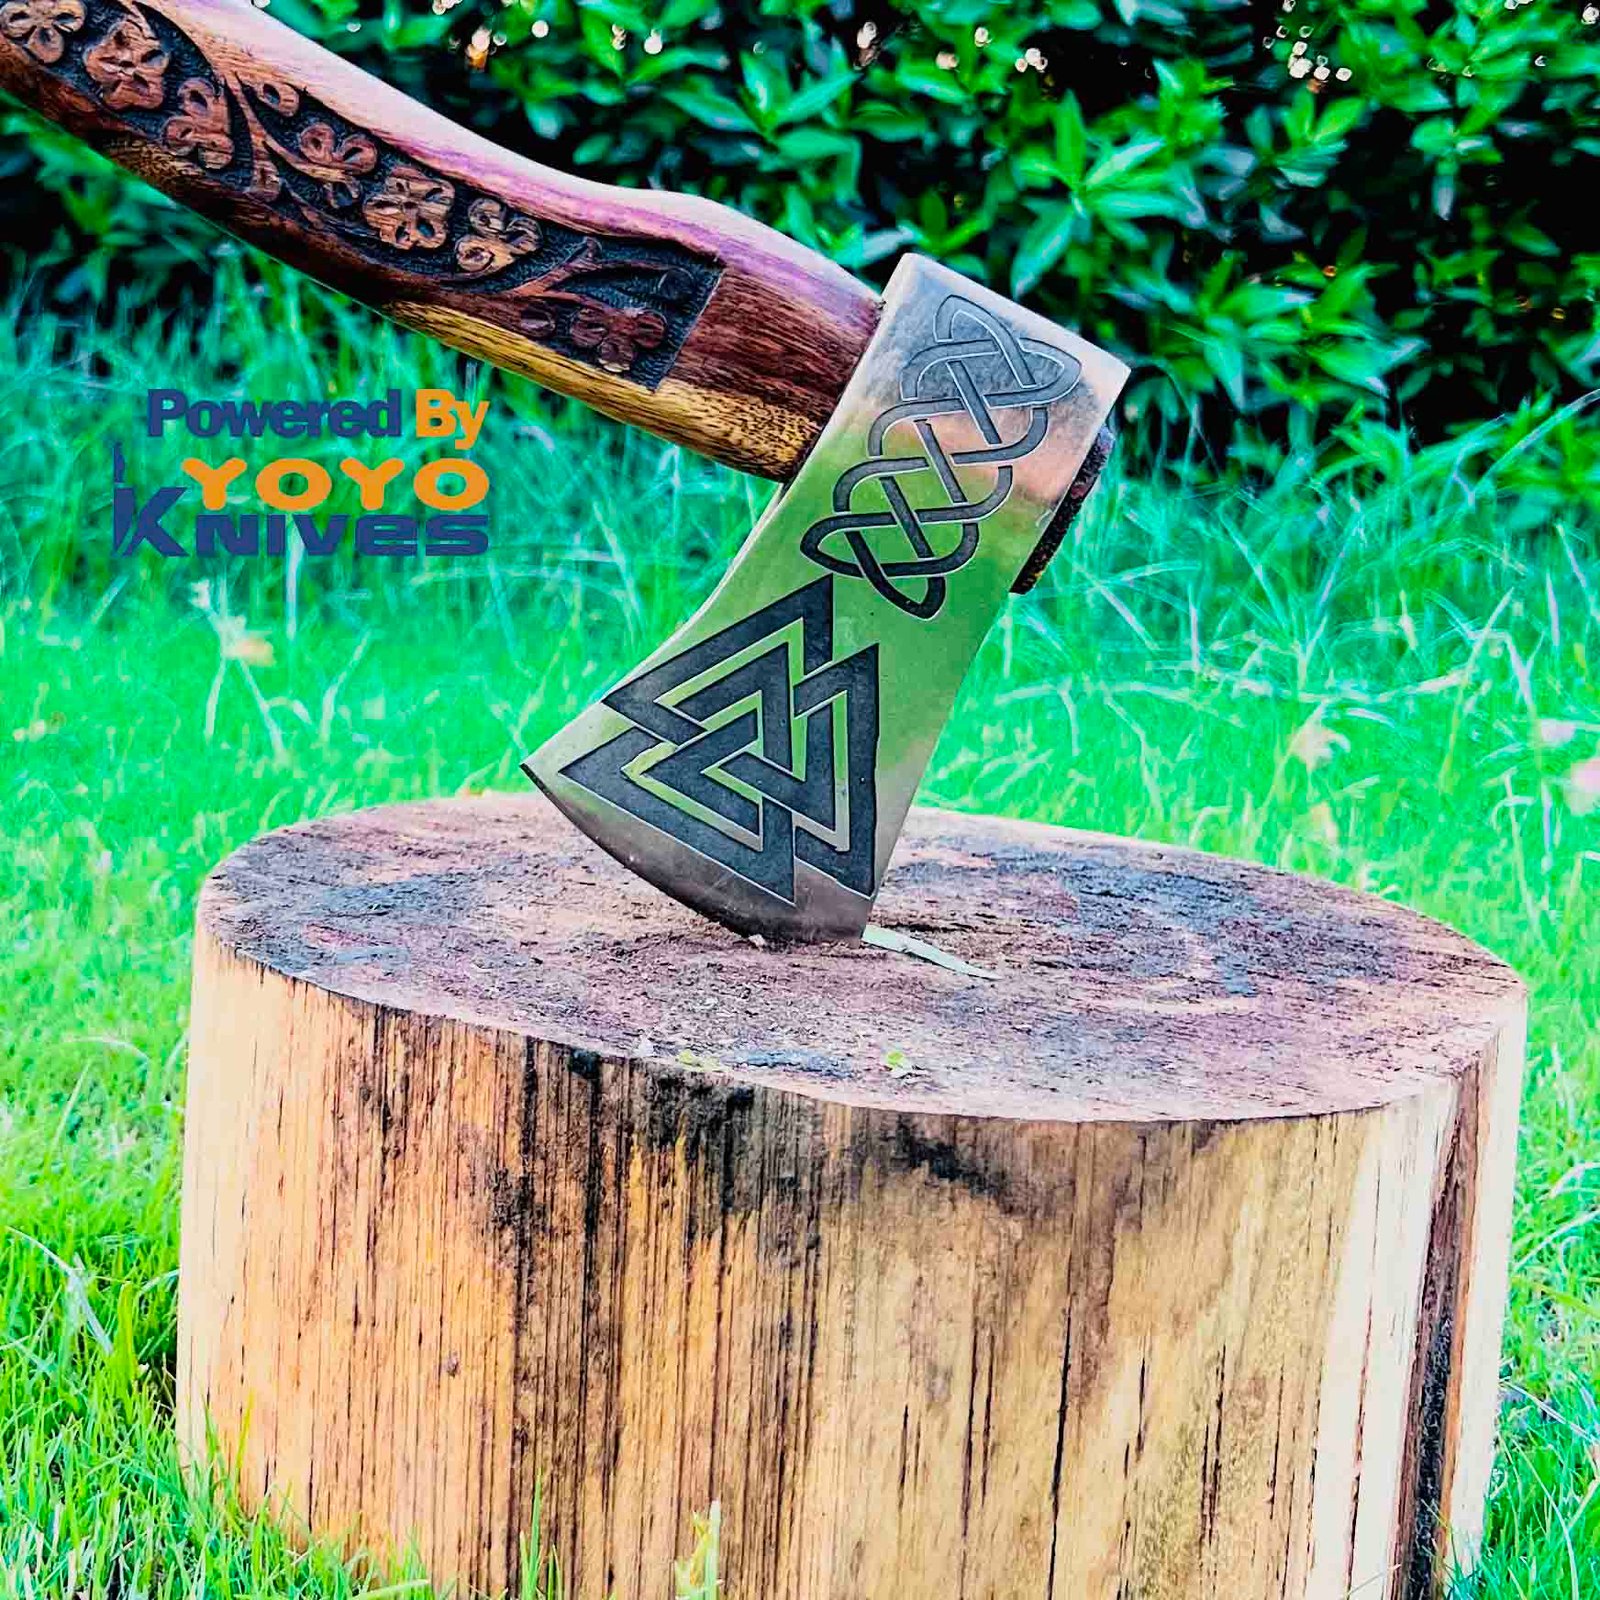 Custom Forged Carbon Steel Viking Axe With Rose Wood Shaft